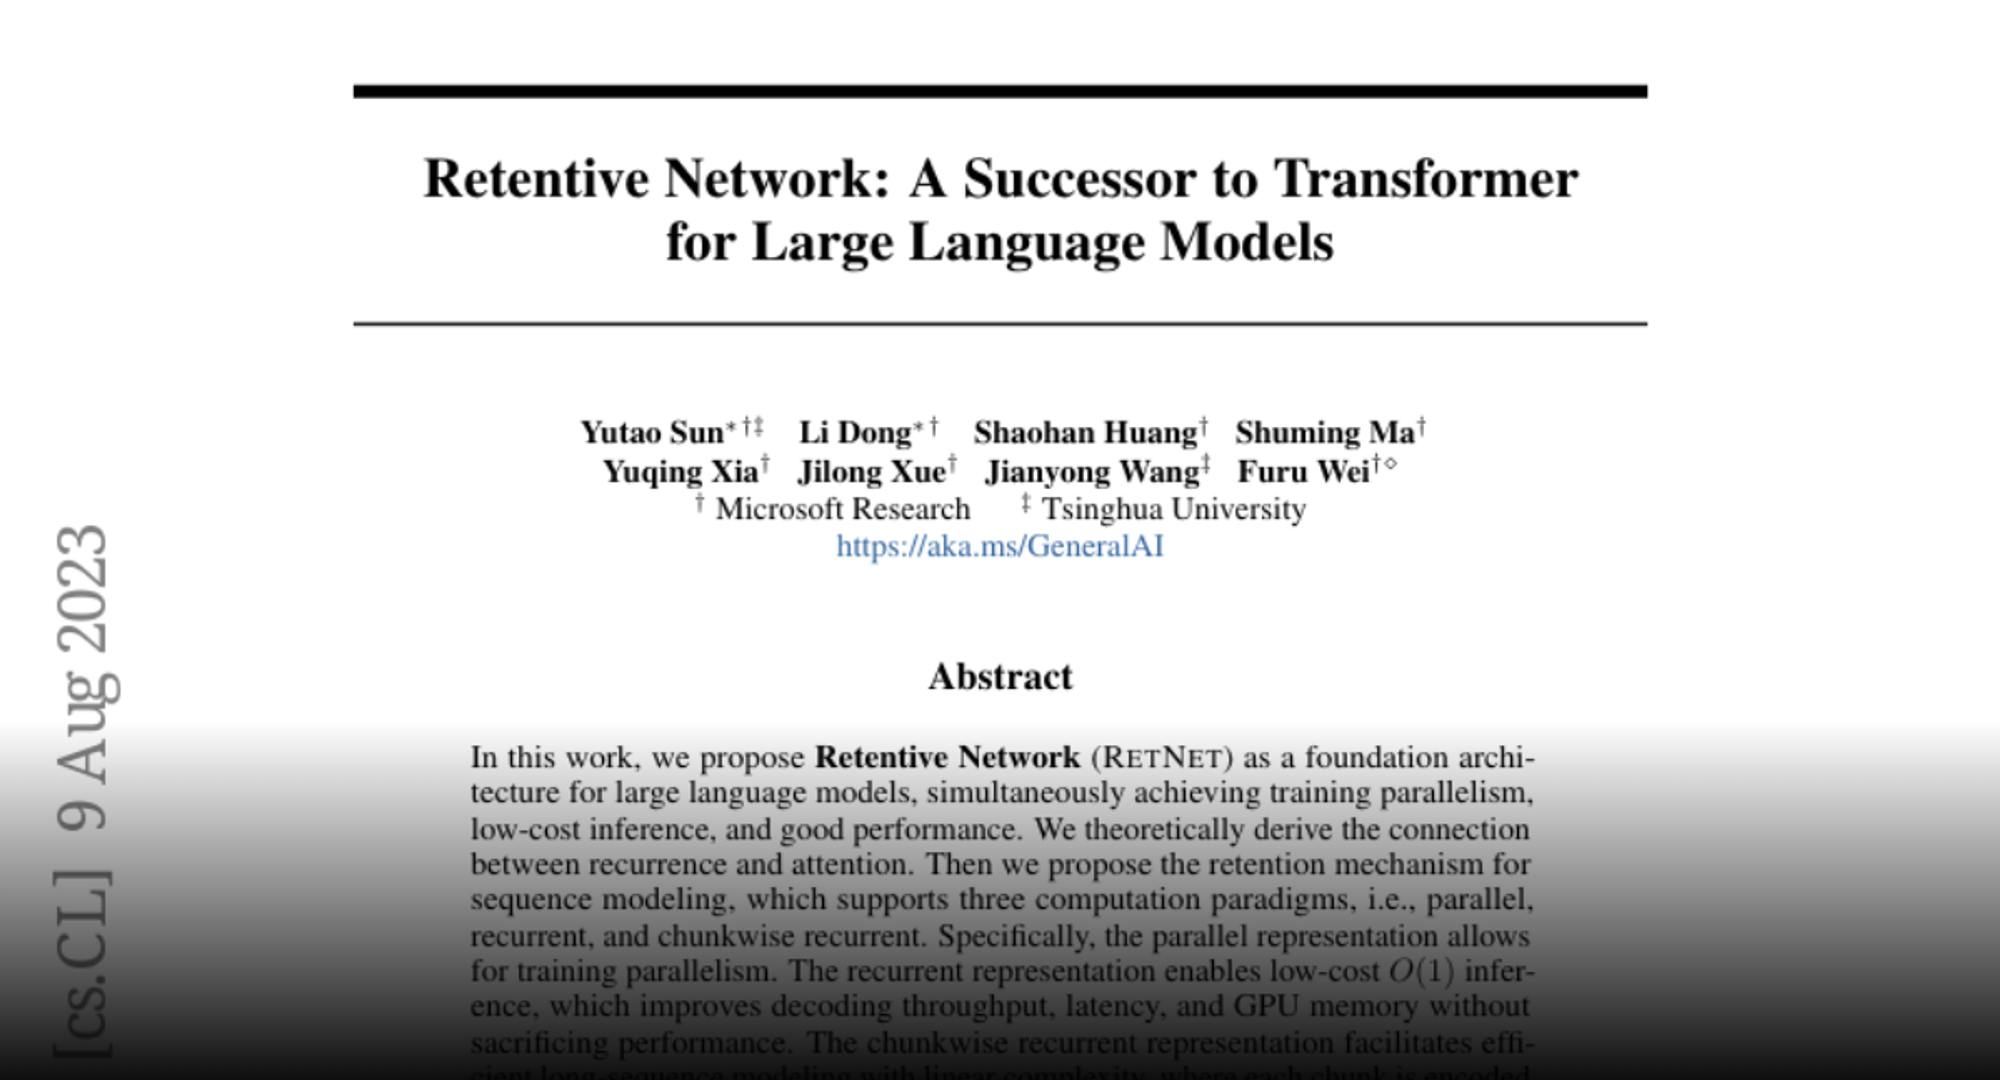 Paper page - Retentive Network: A Successor to Transformer for Large Language Models